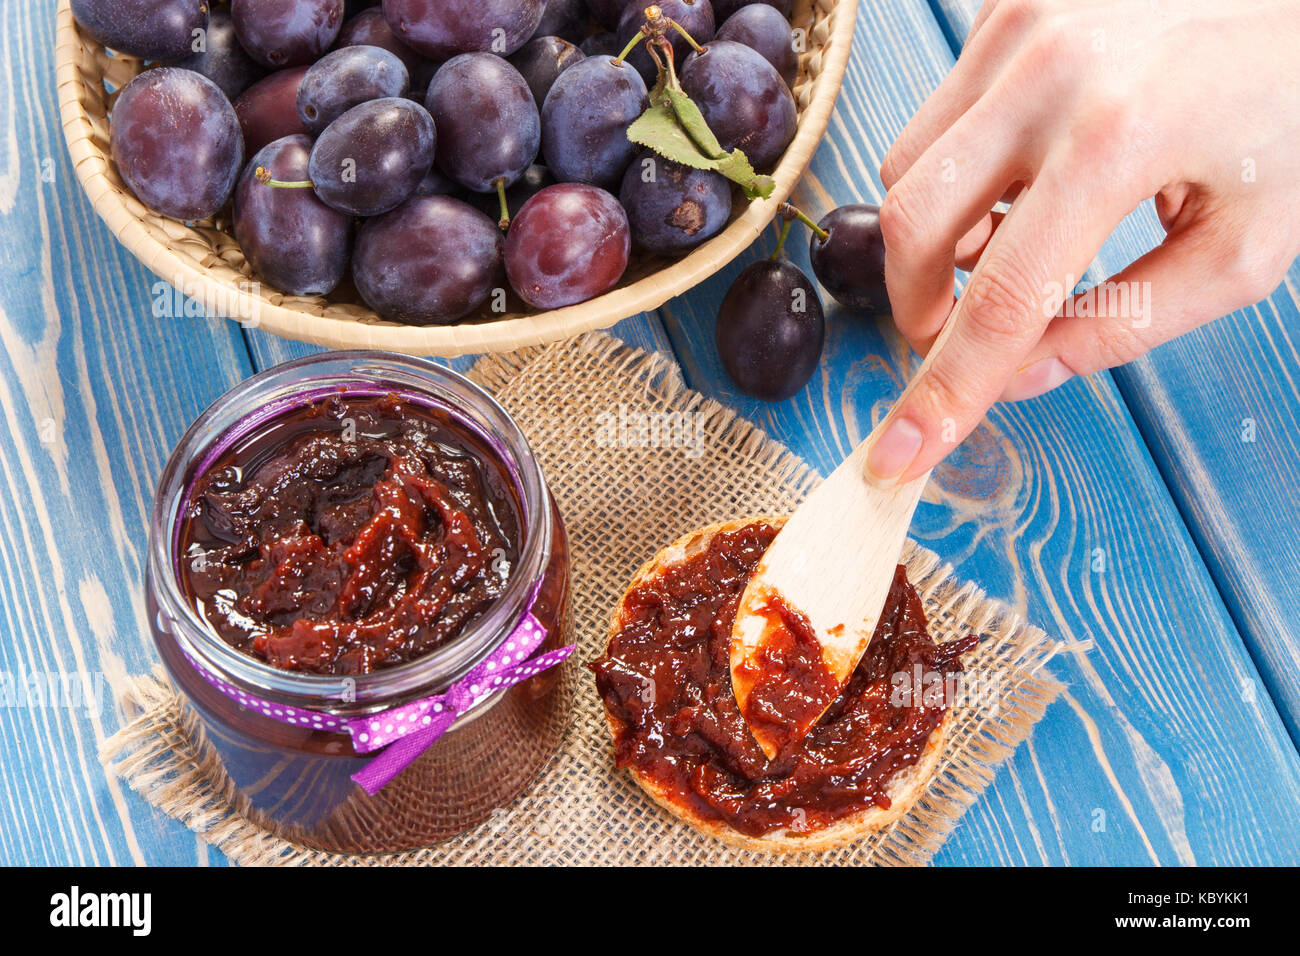 Hand of woman with wooden knife preparing sandwiches with plum marmalade or jam, concept of healthy sweet snack or dessert Stock Photo